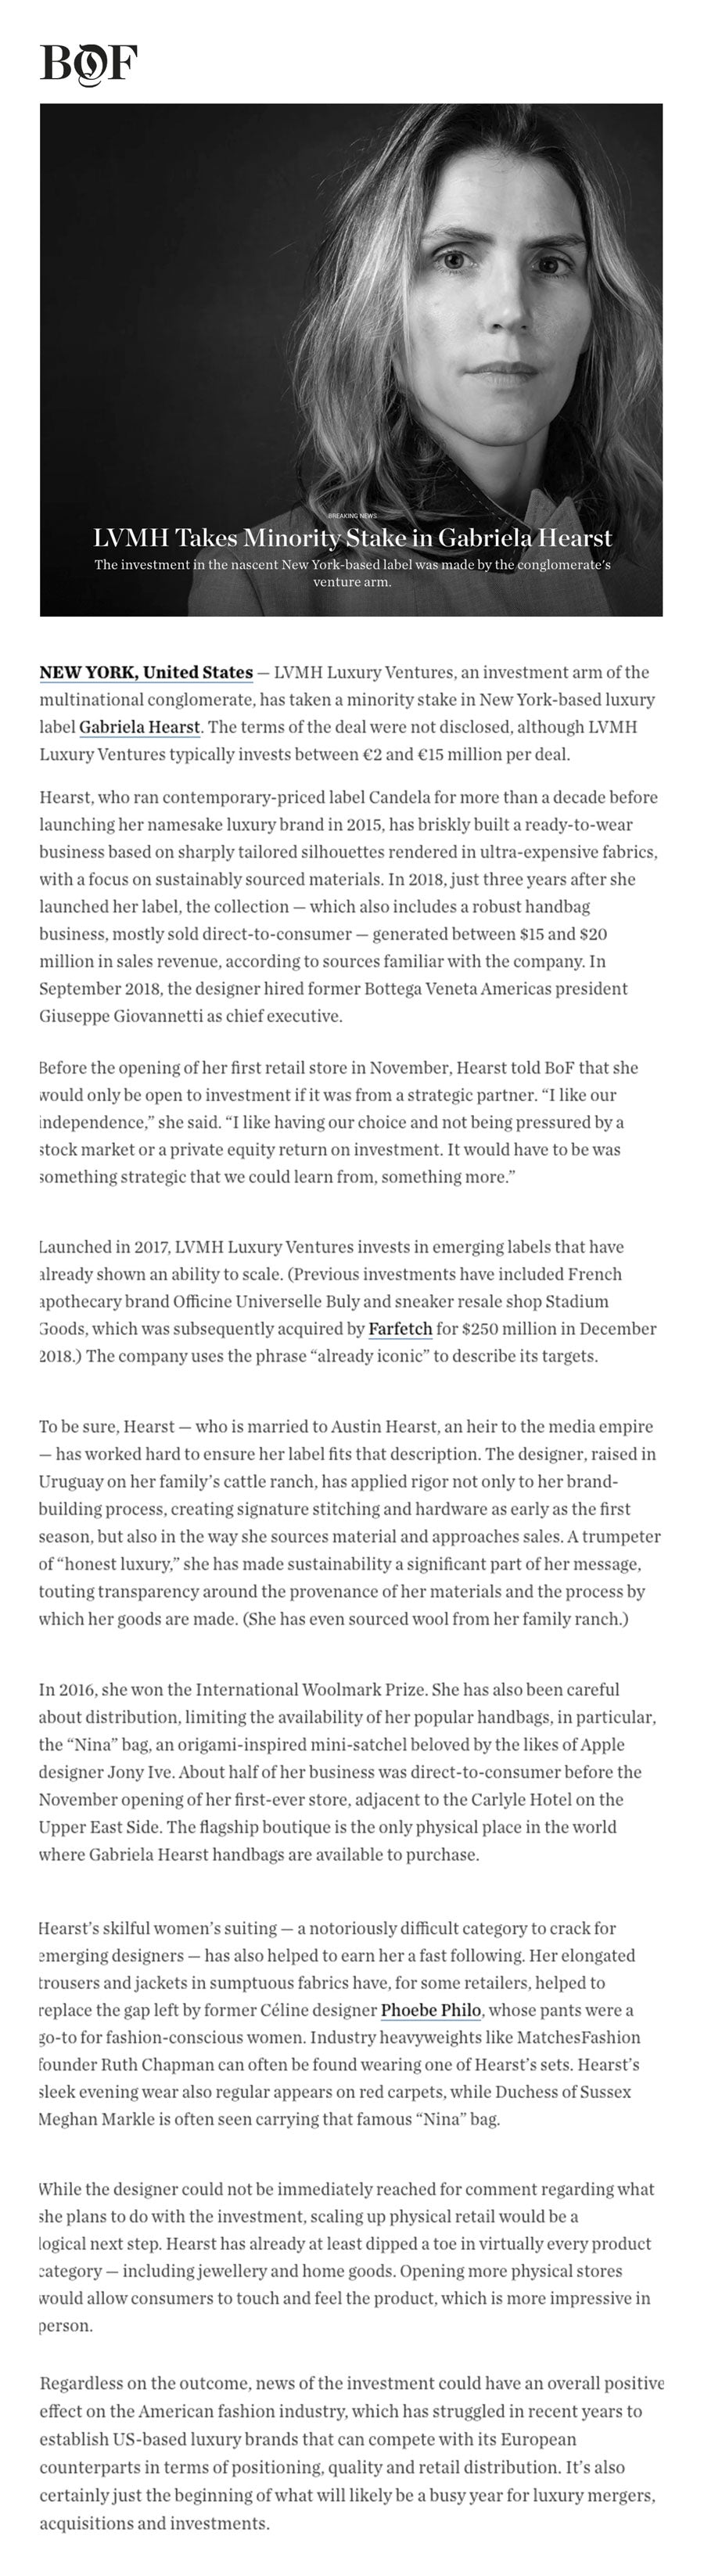 LVMH Acquisitions - Timeline